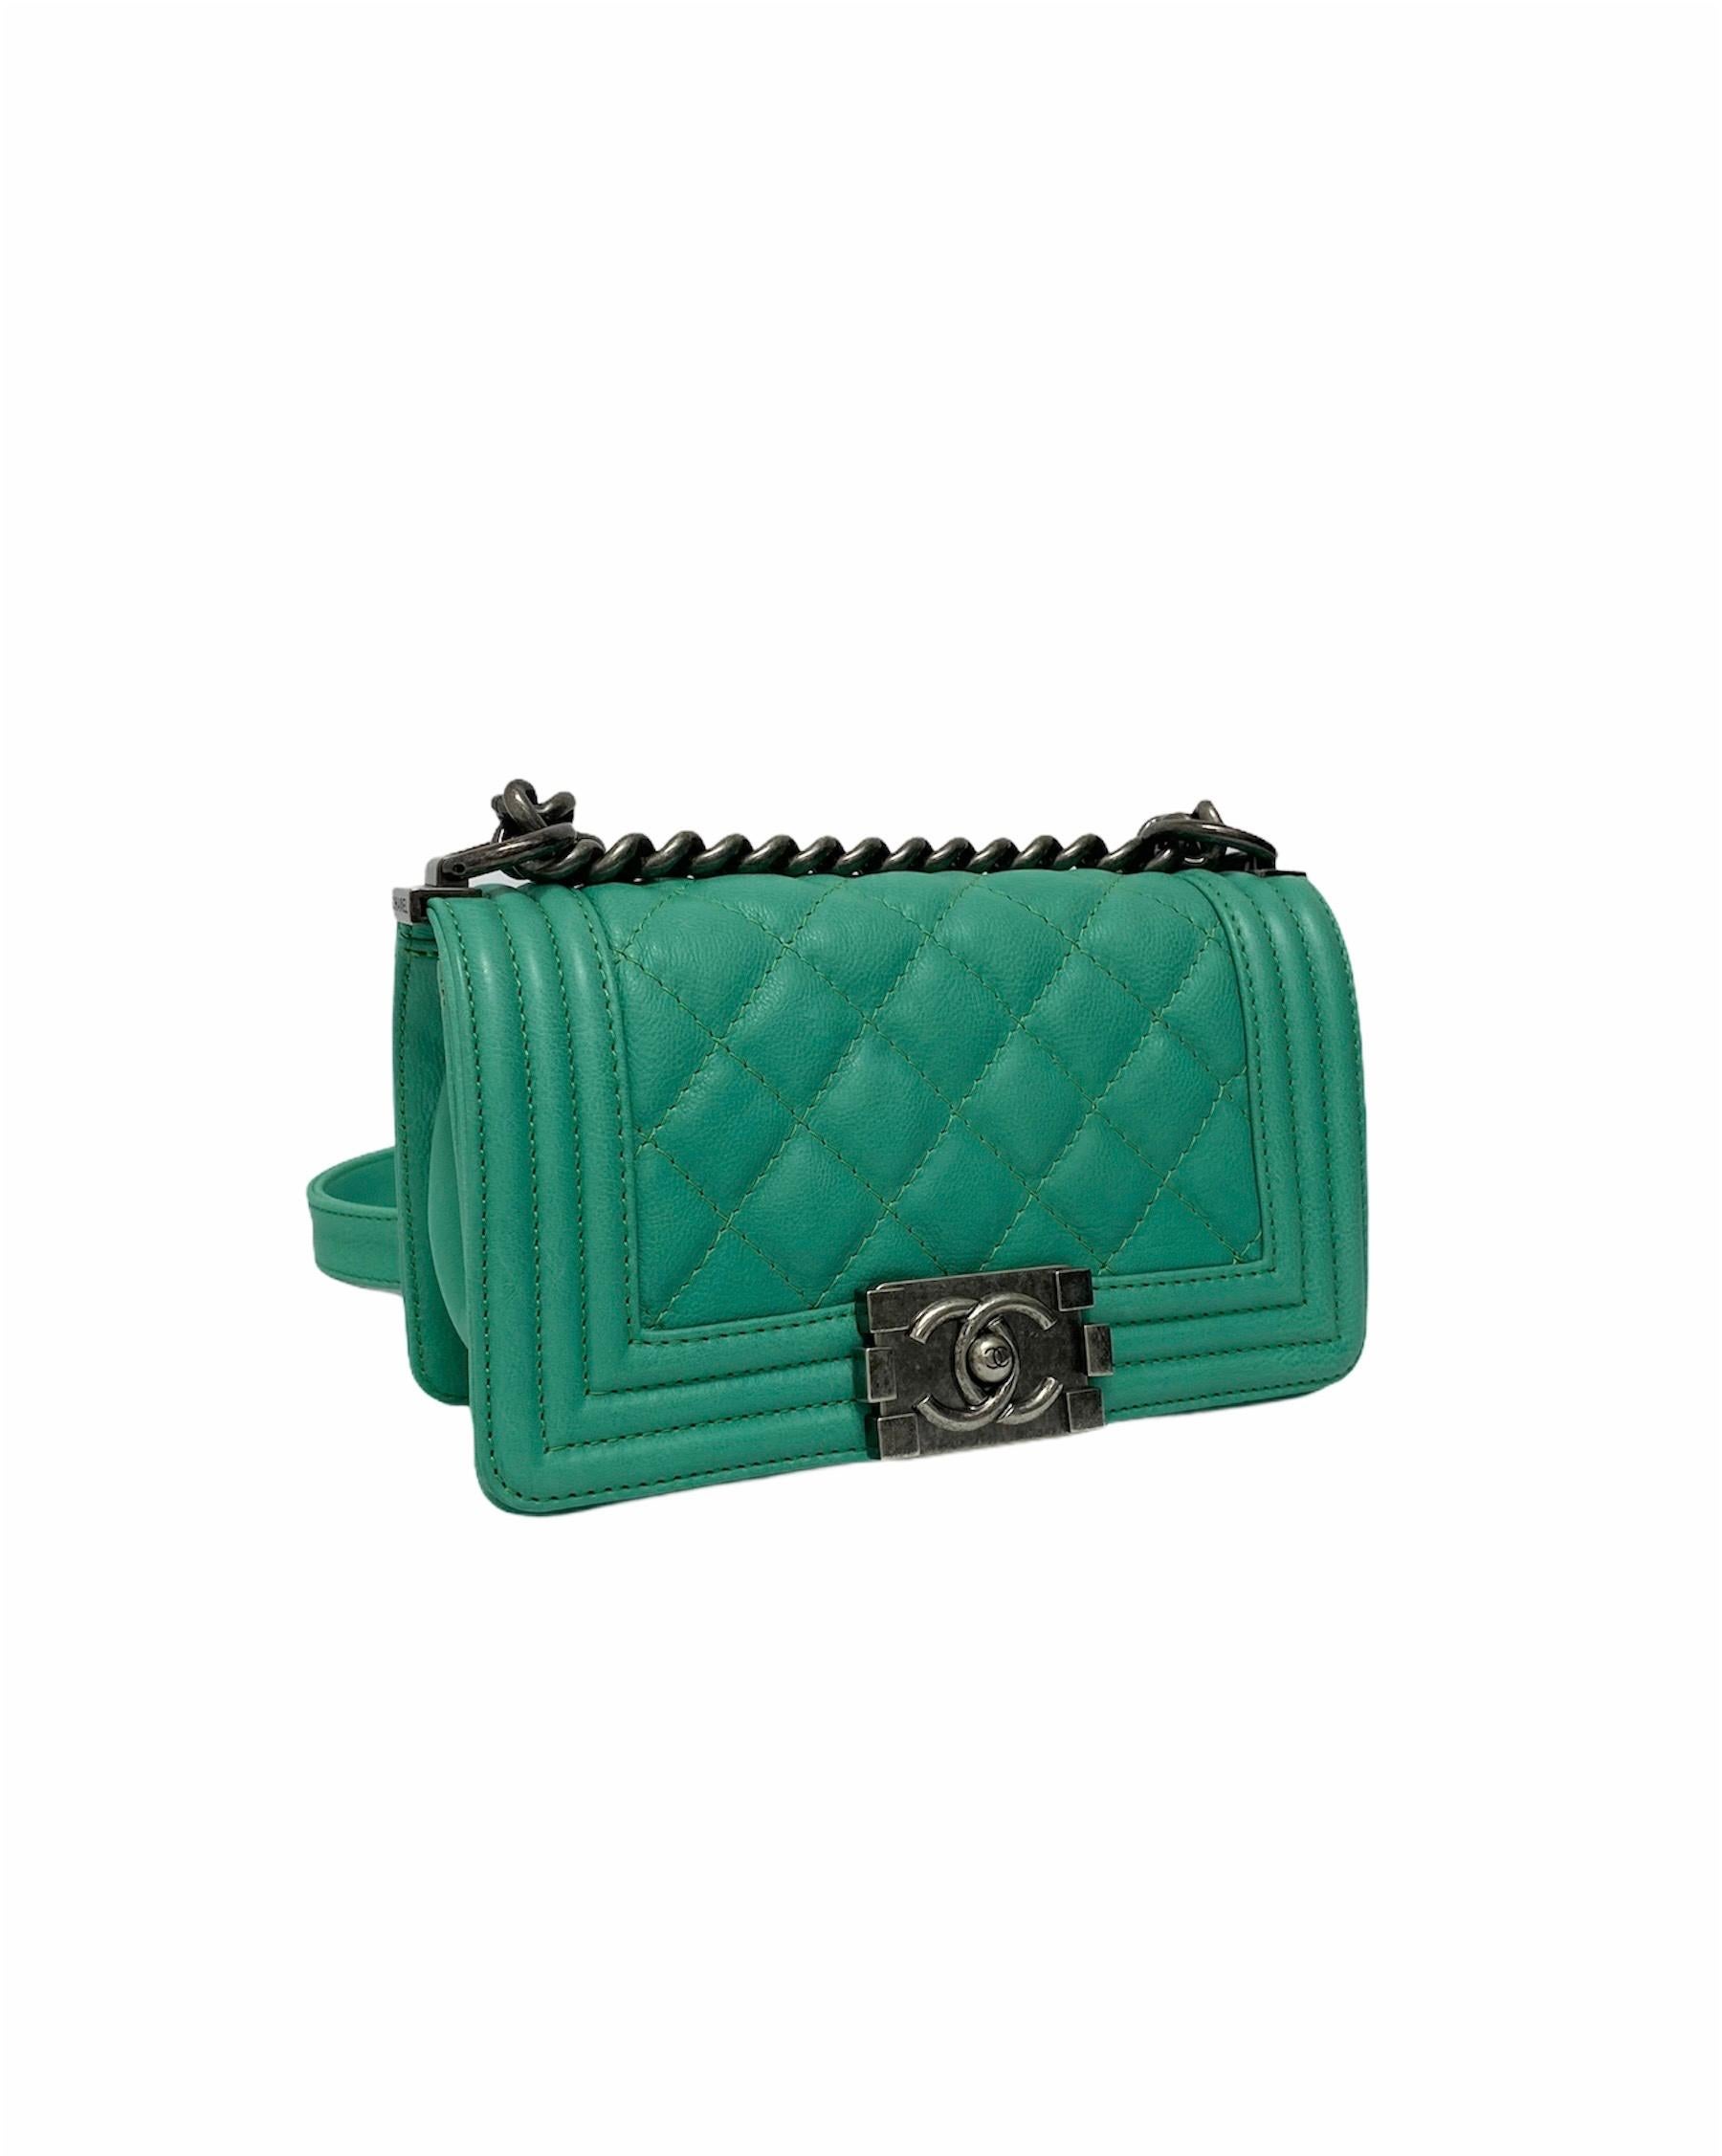 Chanel bag, Boy model, made of aquamarine green leather with silver hardware. Equipped with an interlocking closure, internally lined in black fabric, roomy for the essentials. Equipped with a sliding shoulder strap in leather and chain. The product